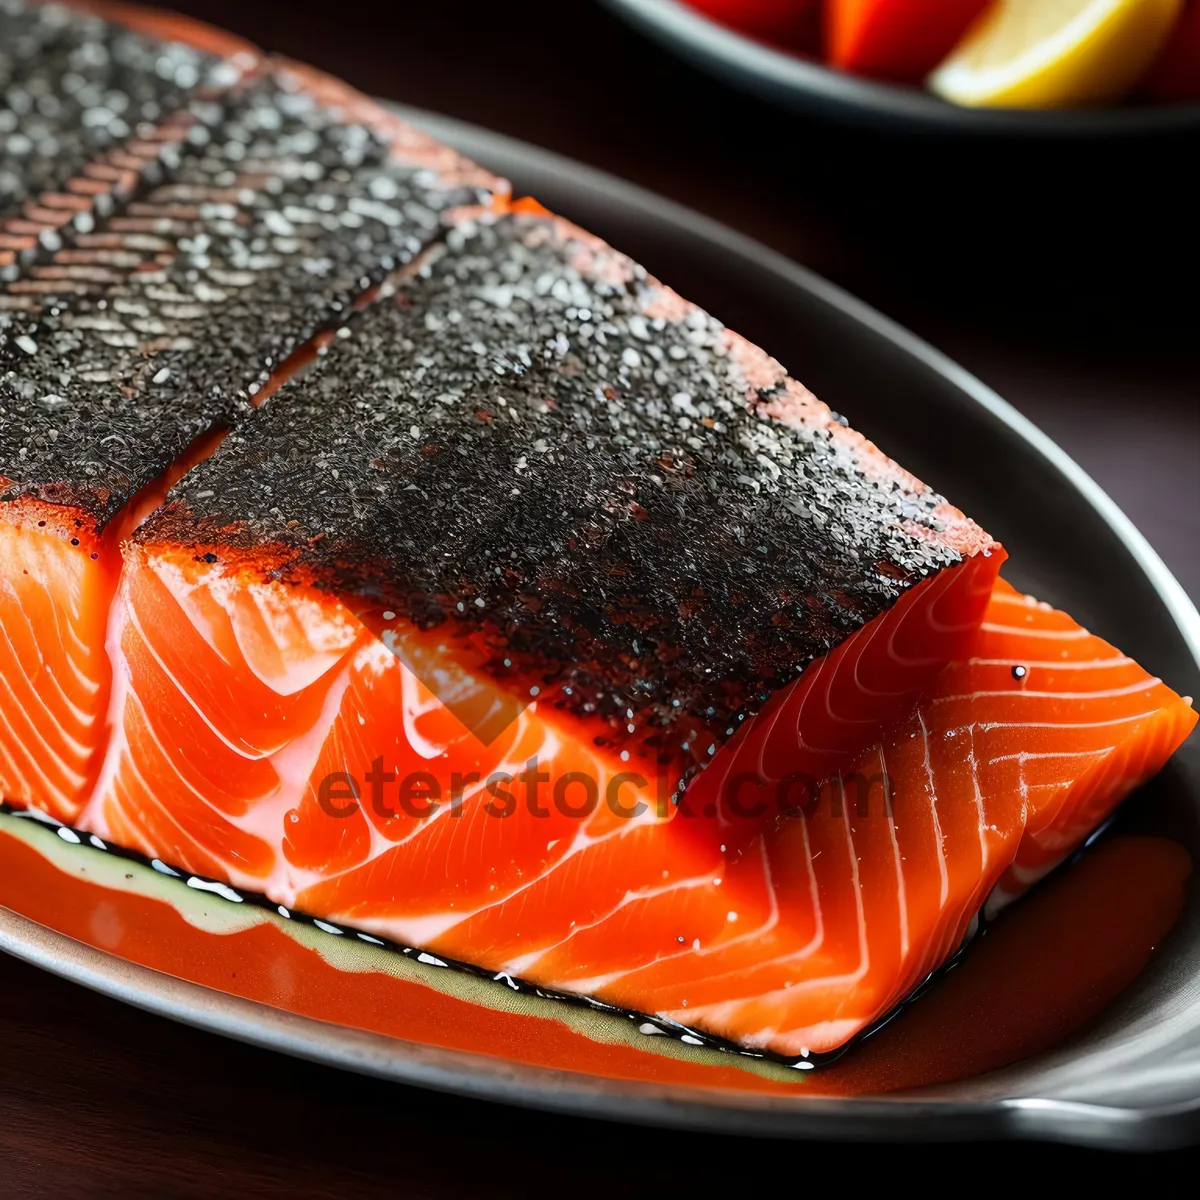 Picture of Delicious Gourmet Salmon Fillet on Plate